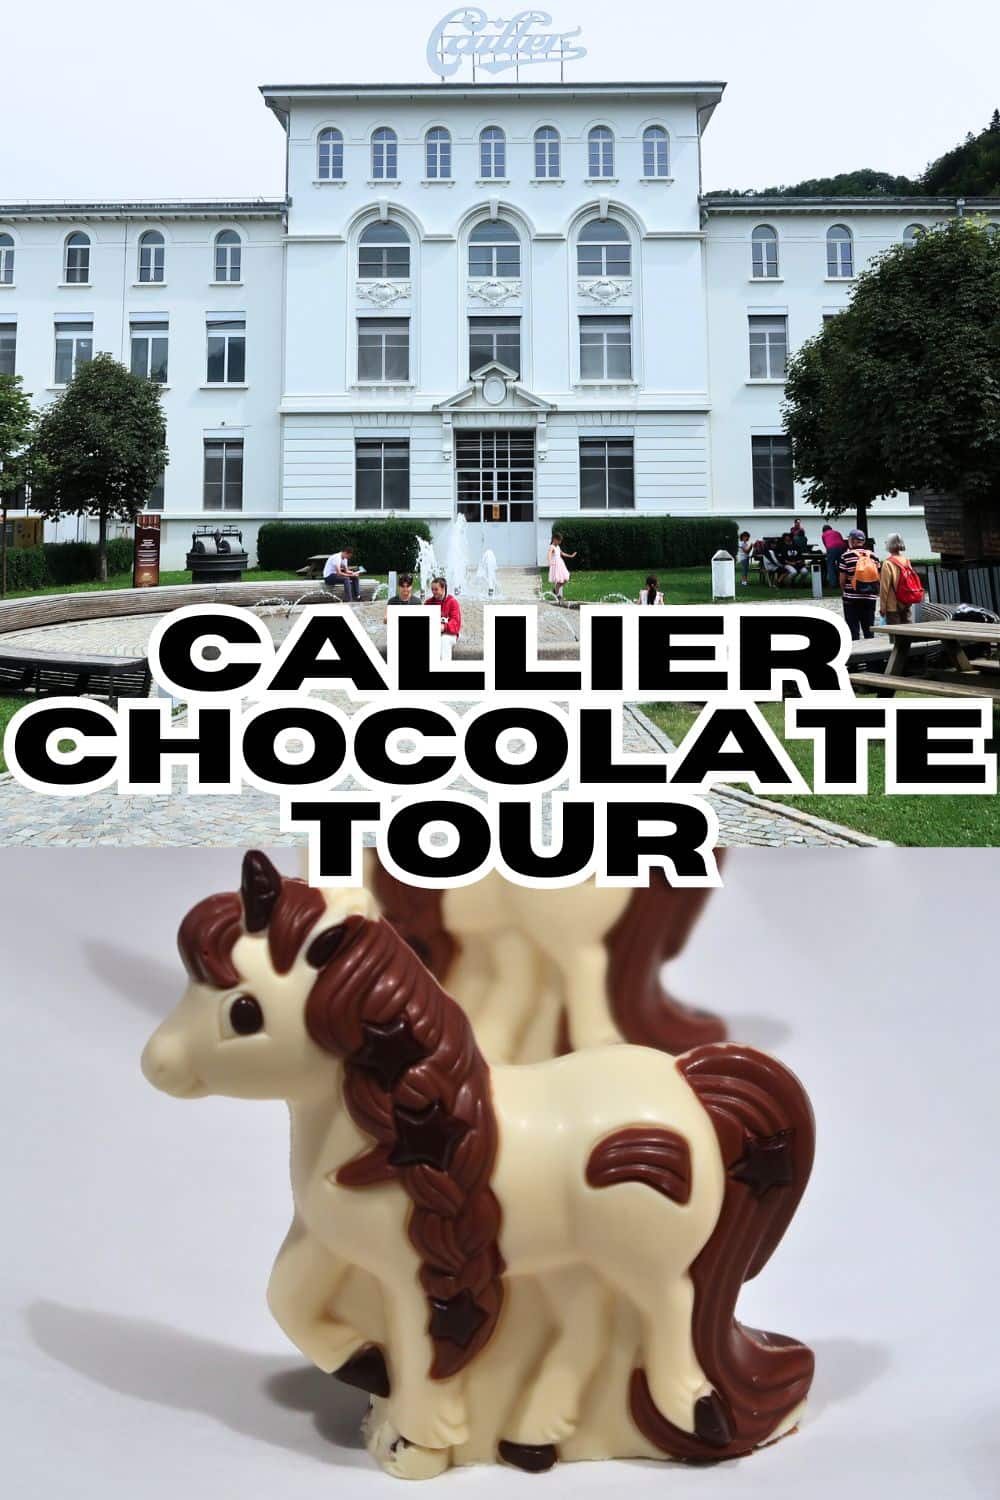 Maison Cailler Chocolate Tour in Broc